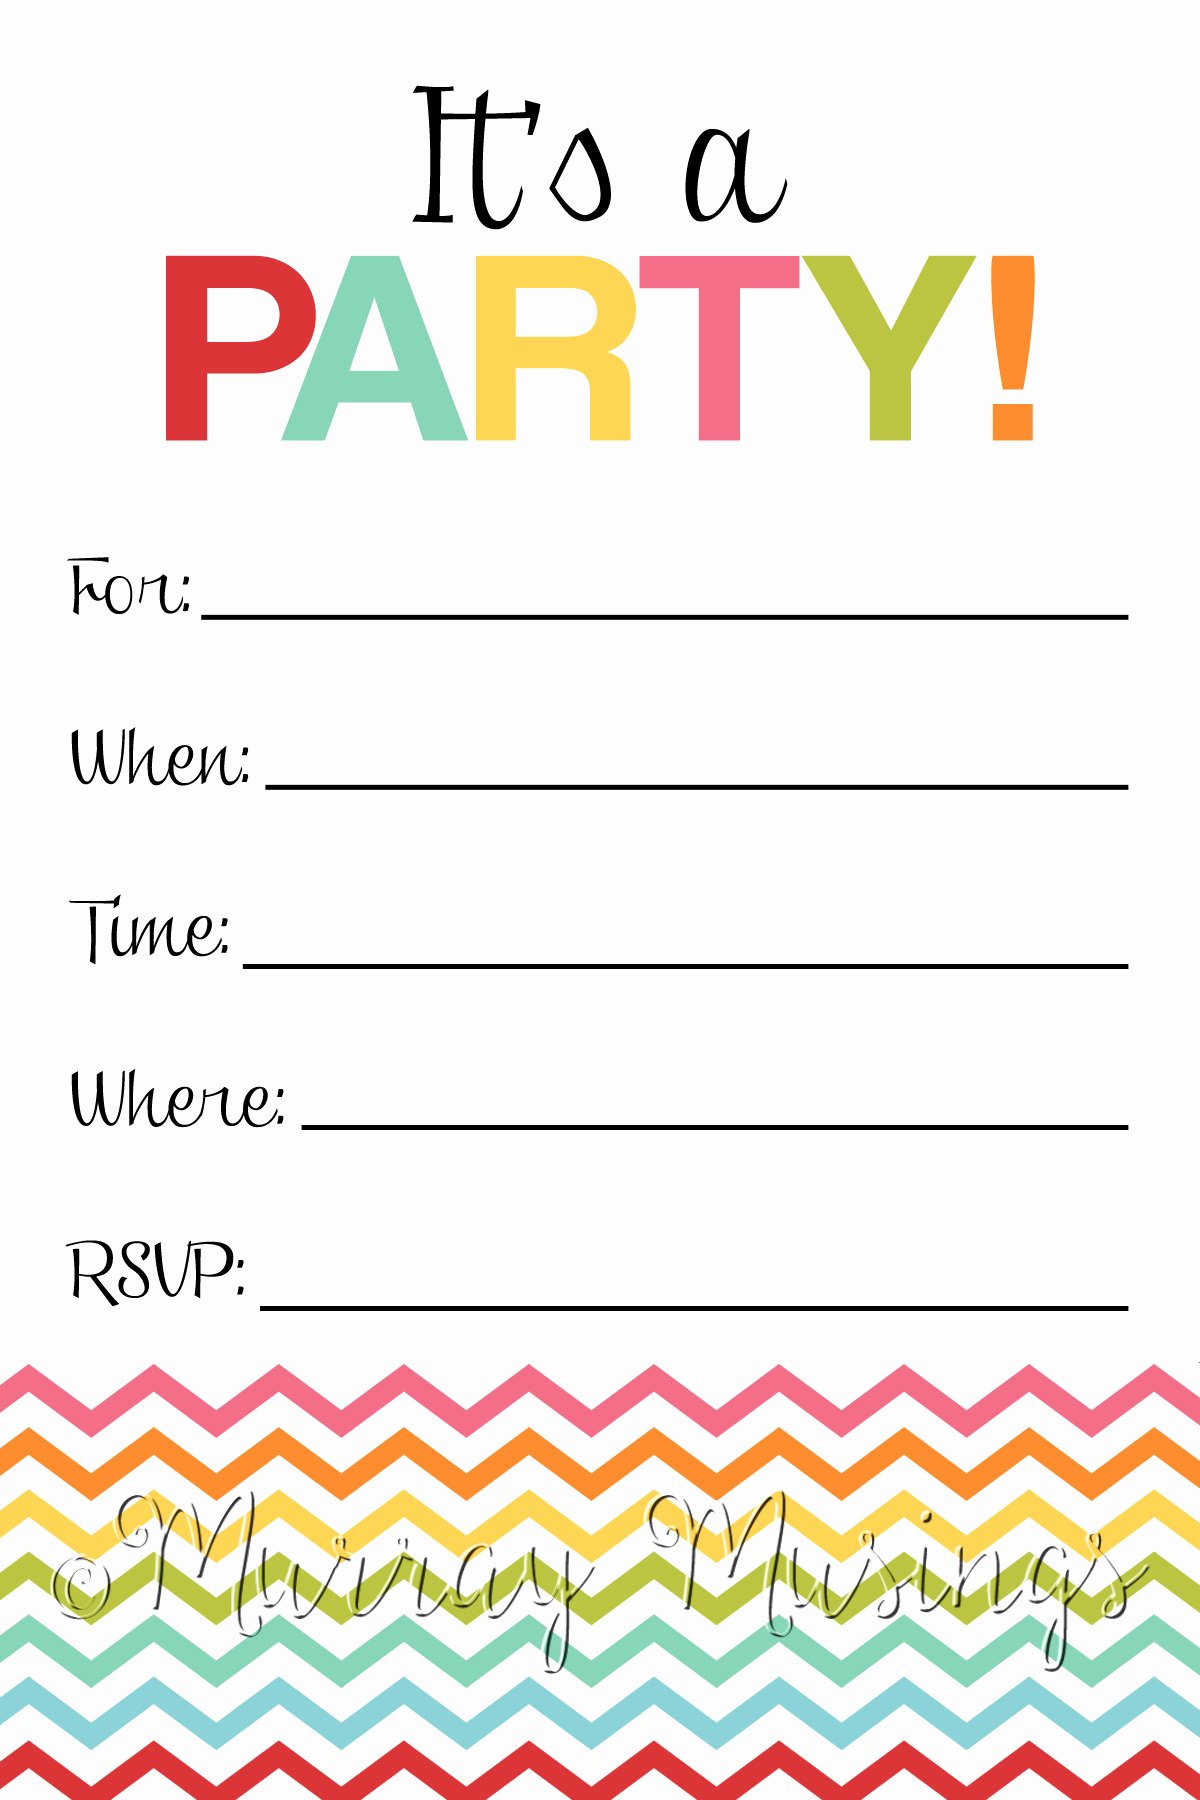 Blank Party Invitations Blank Party Invitations for Simple